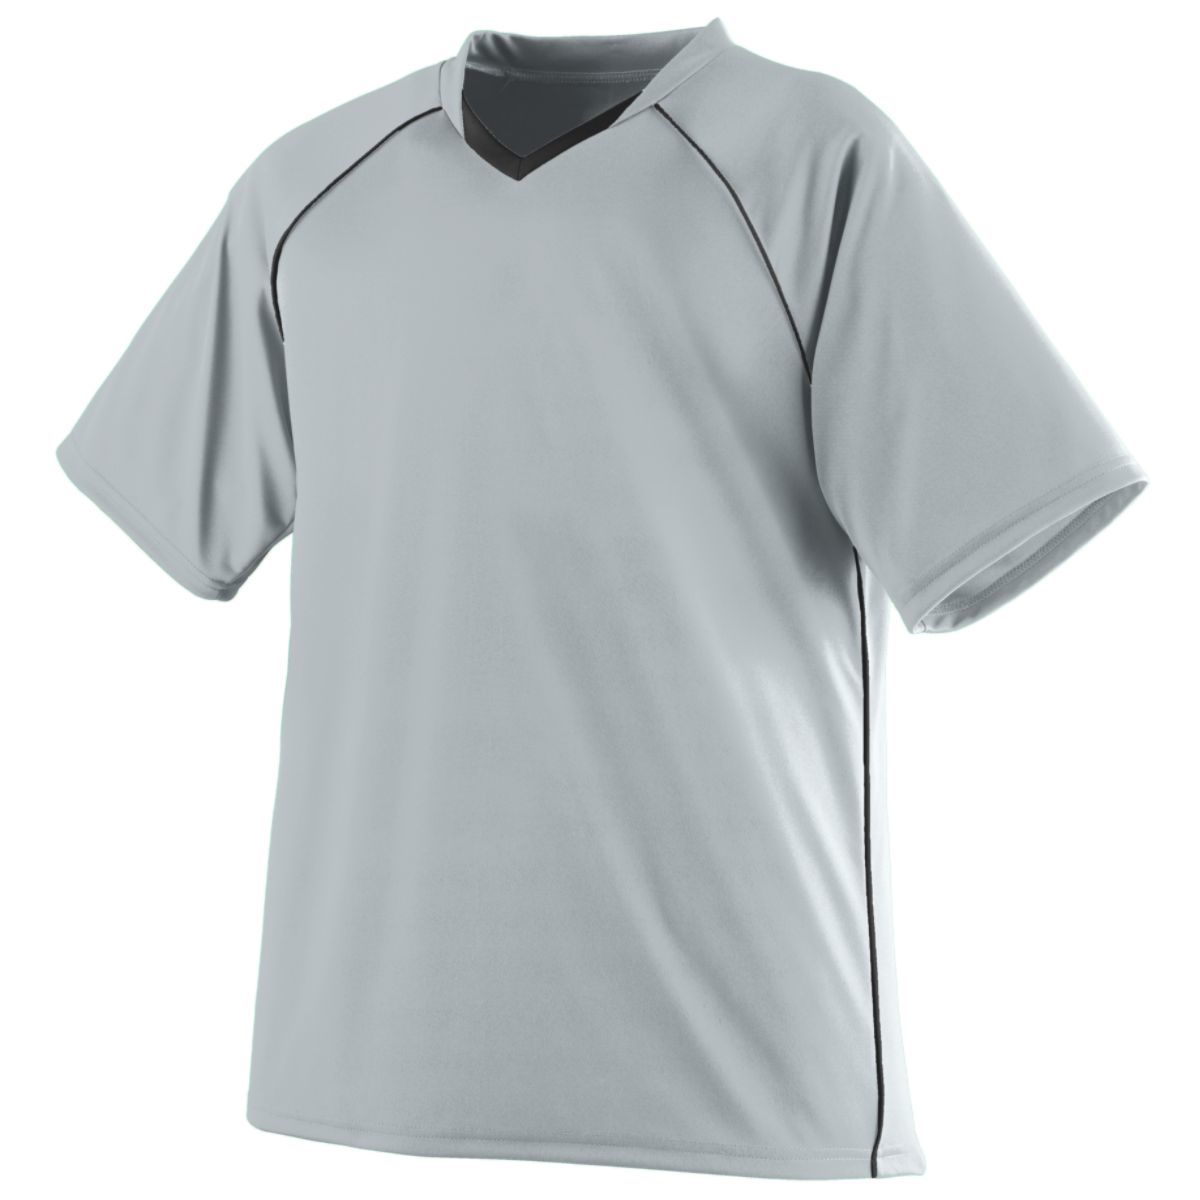 Augusta Sportswear Striker Jersey in Silver/Black  -Part of the Adult, Adult-Jersey, Augusta-Products, Soccer, Shirts, All-Sports-1 product lines at KanaleyCreations.com